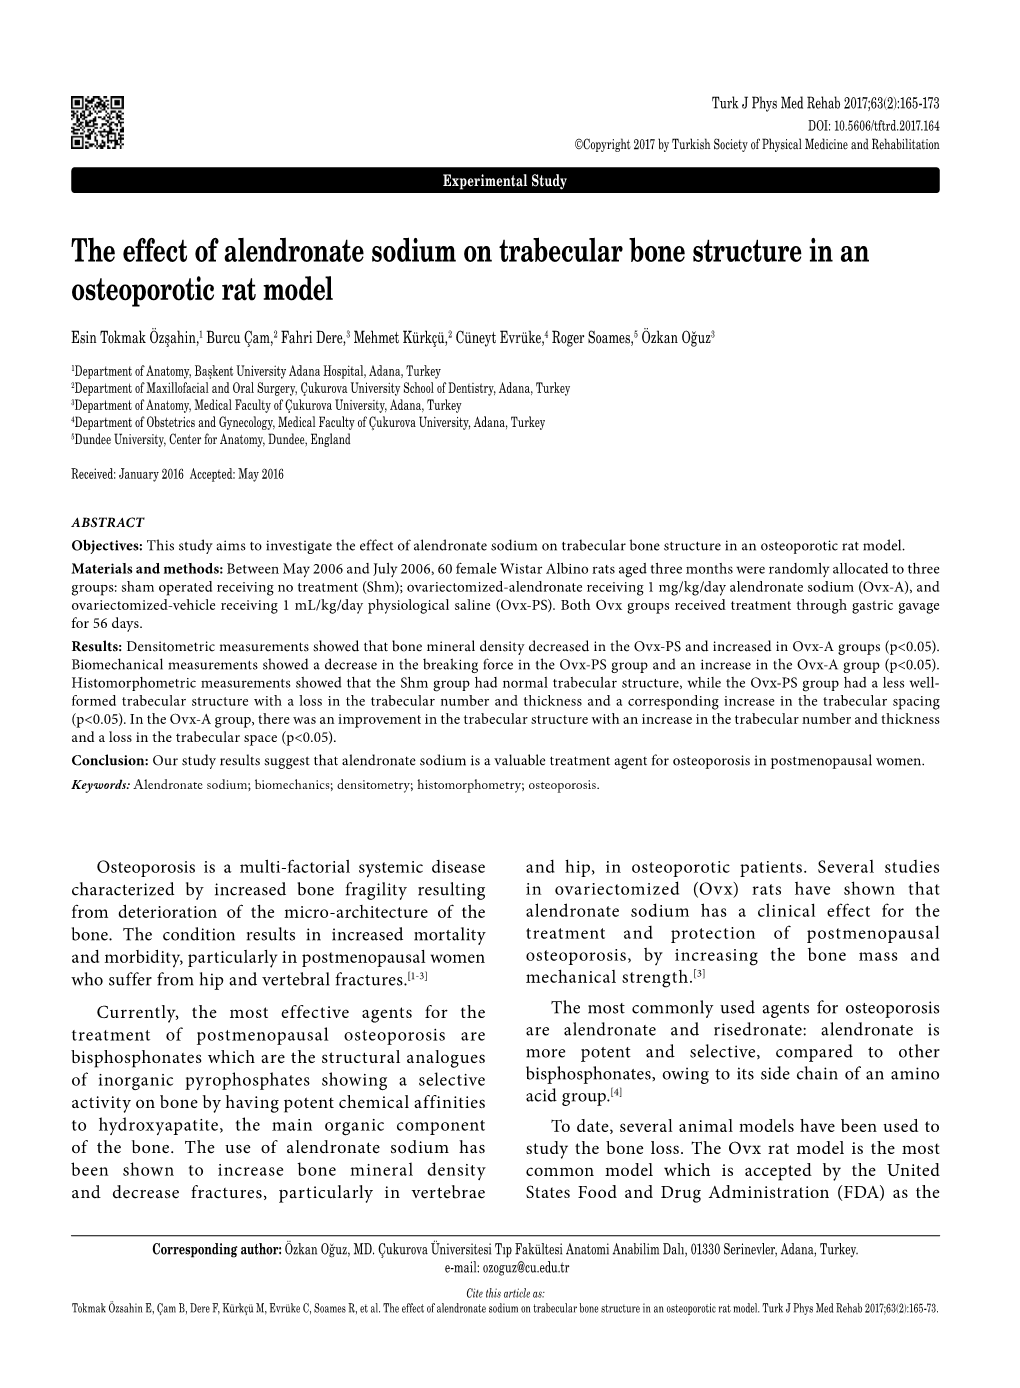 The Effect of Alendronate Sodium on Trabecular Bone Structure in an Osteoporotic Rat Model